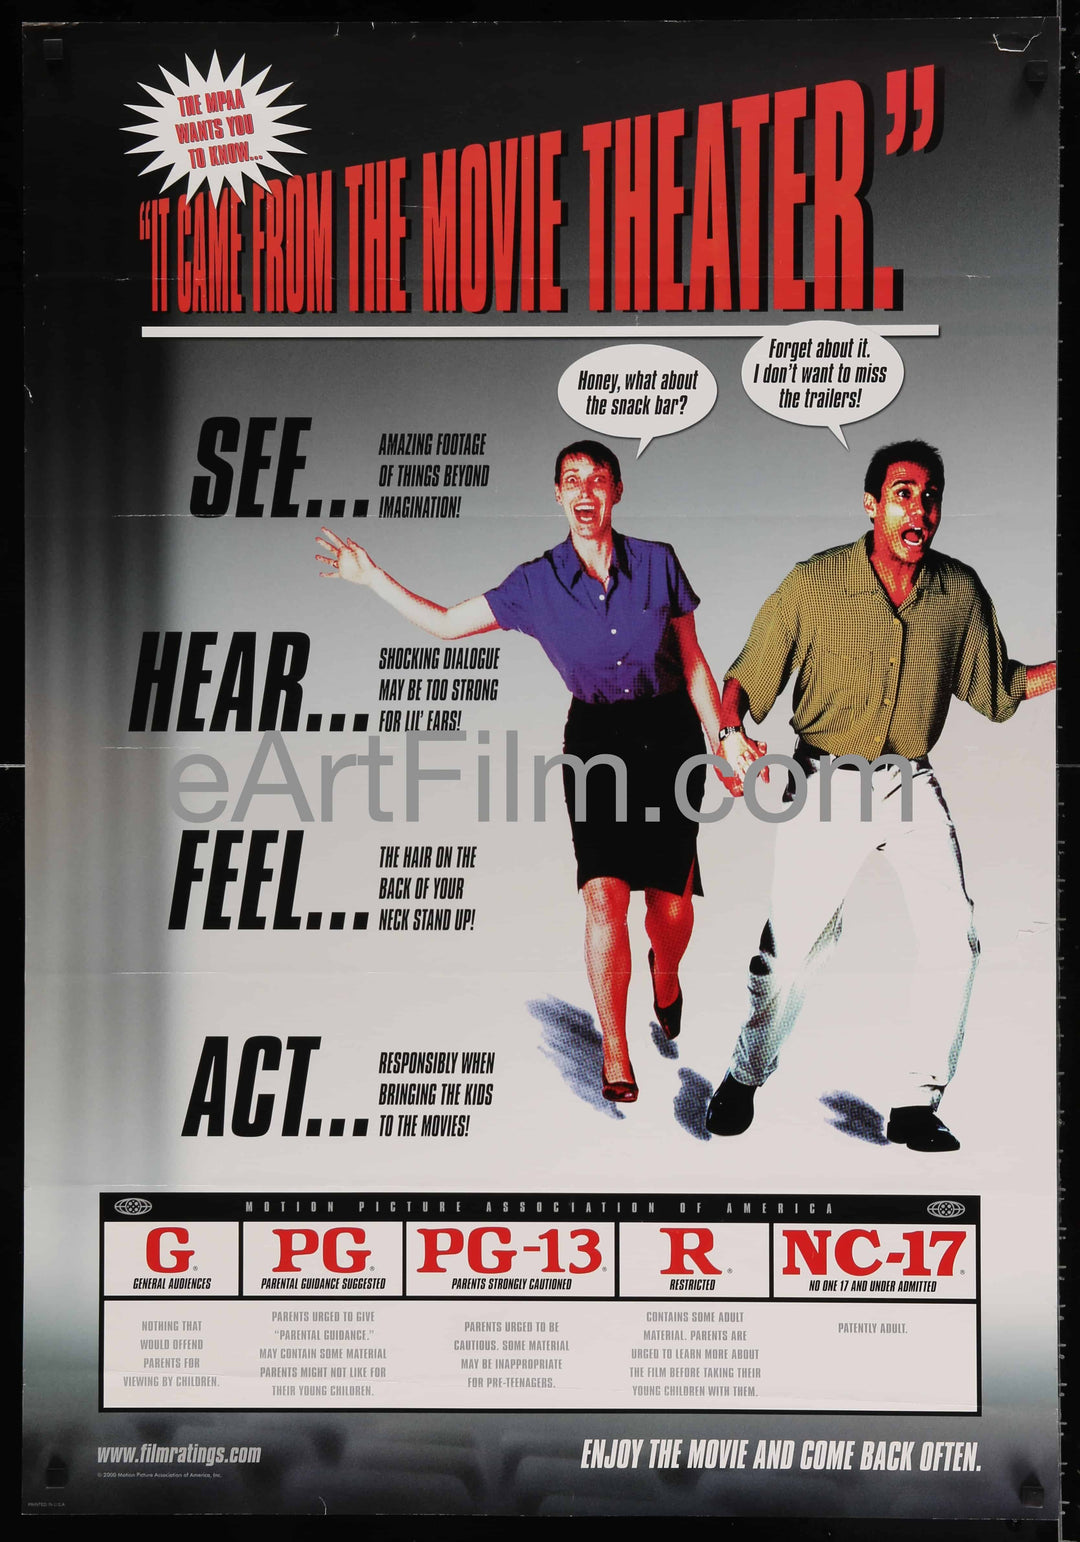 eArtFilm.com Original U.S One Sheet (27"x39")-Original-Vintage-Movie-Poster It Came From The Movie Theatre-MPAA movie rating guide-27x39-2000